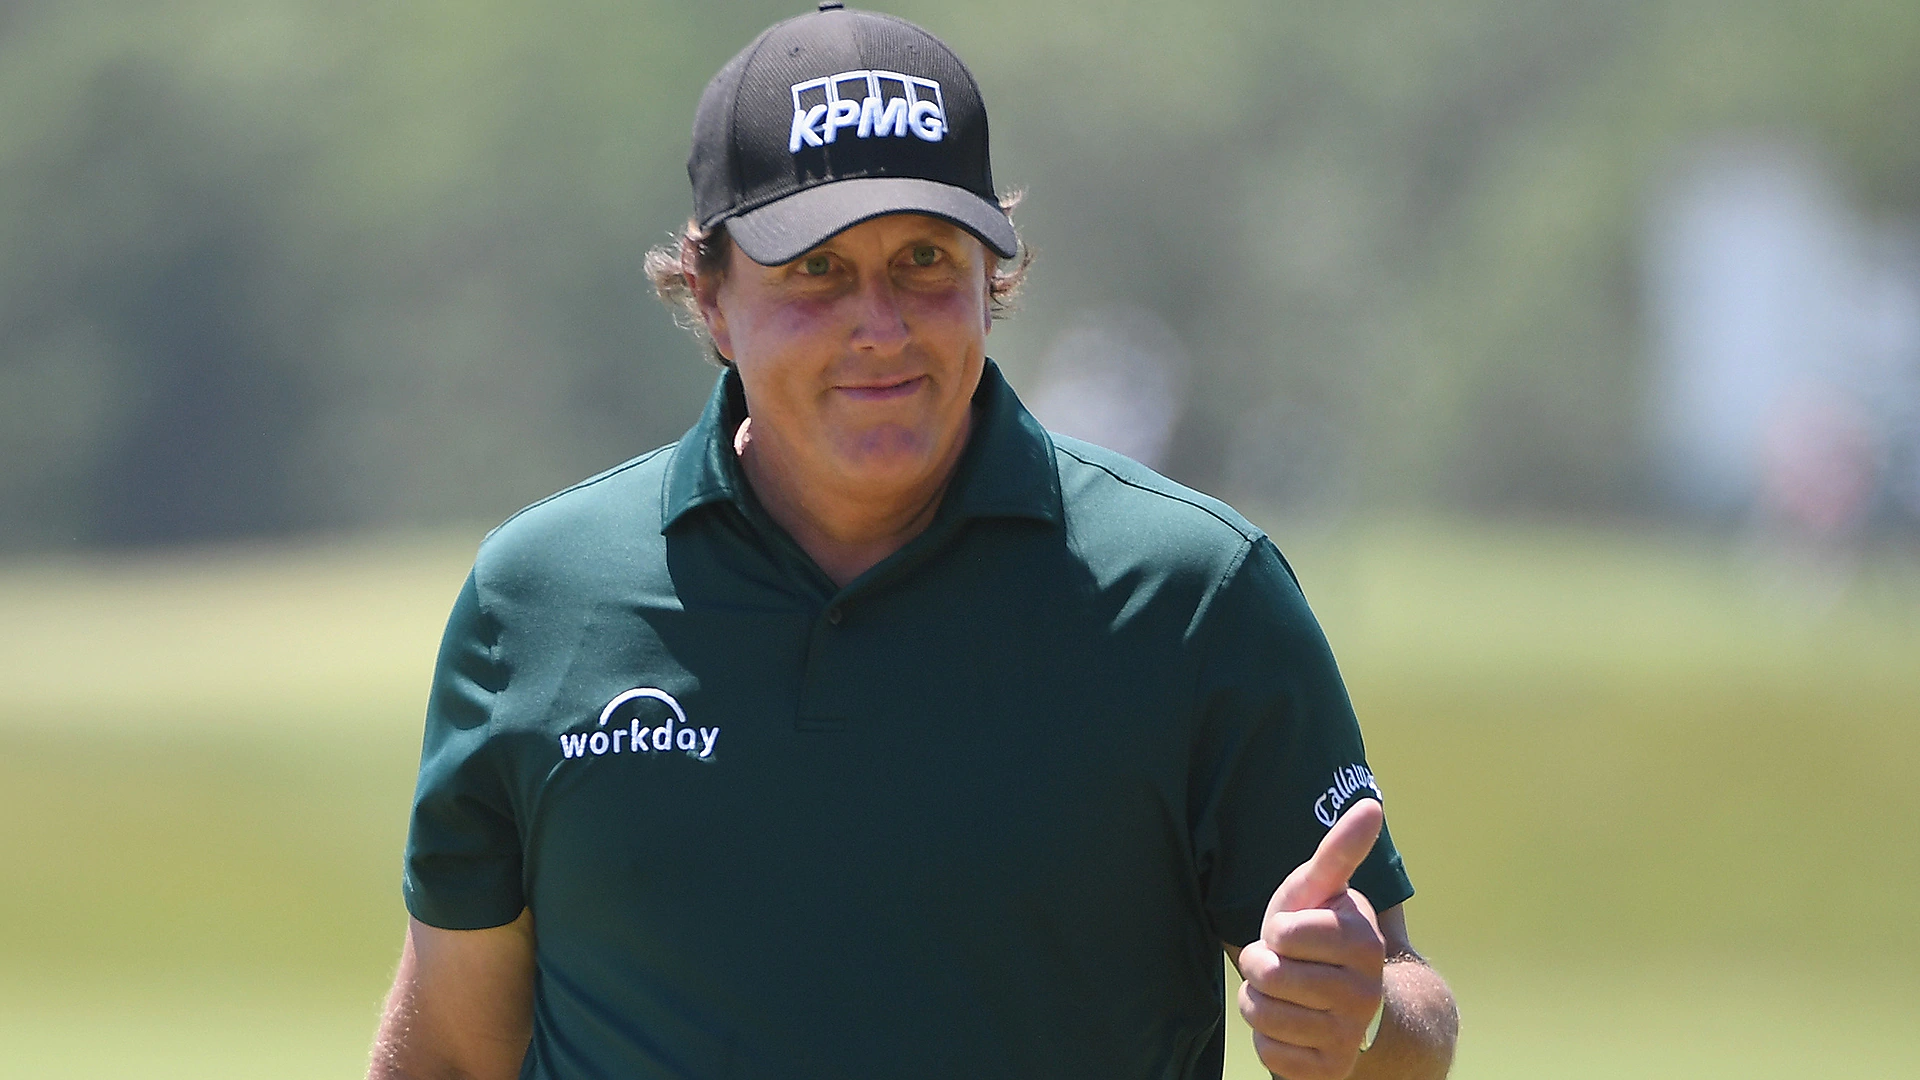 After Further Review: What will Phil do next?